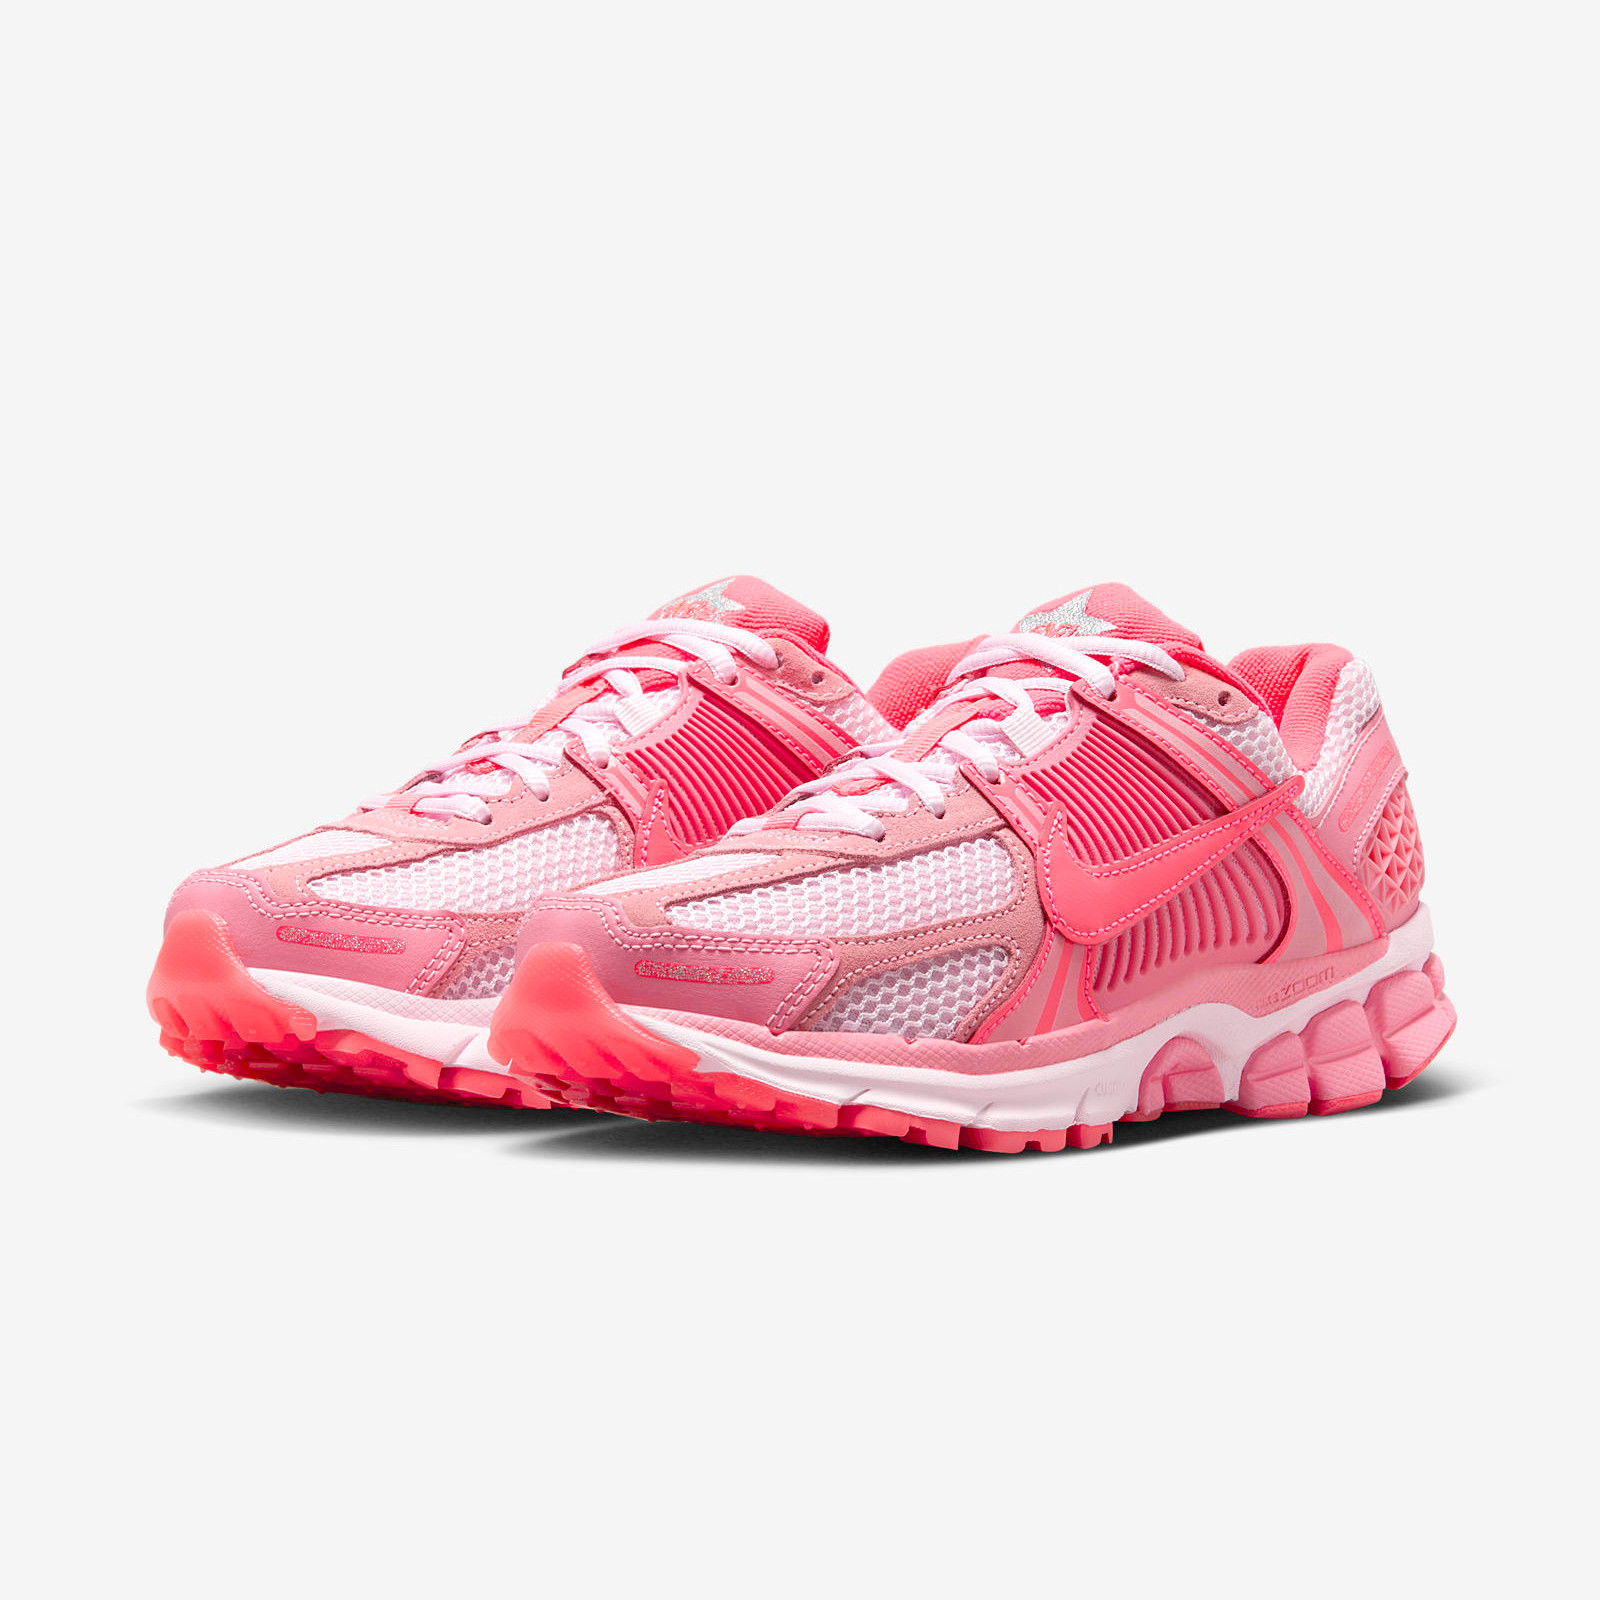 Nike Zoom Vomero 5
Coral Chalk / Hot Punch